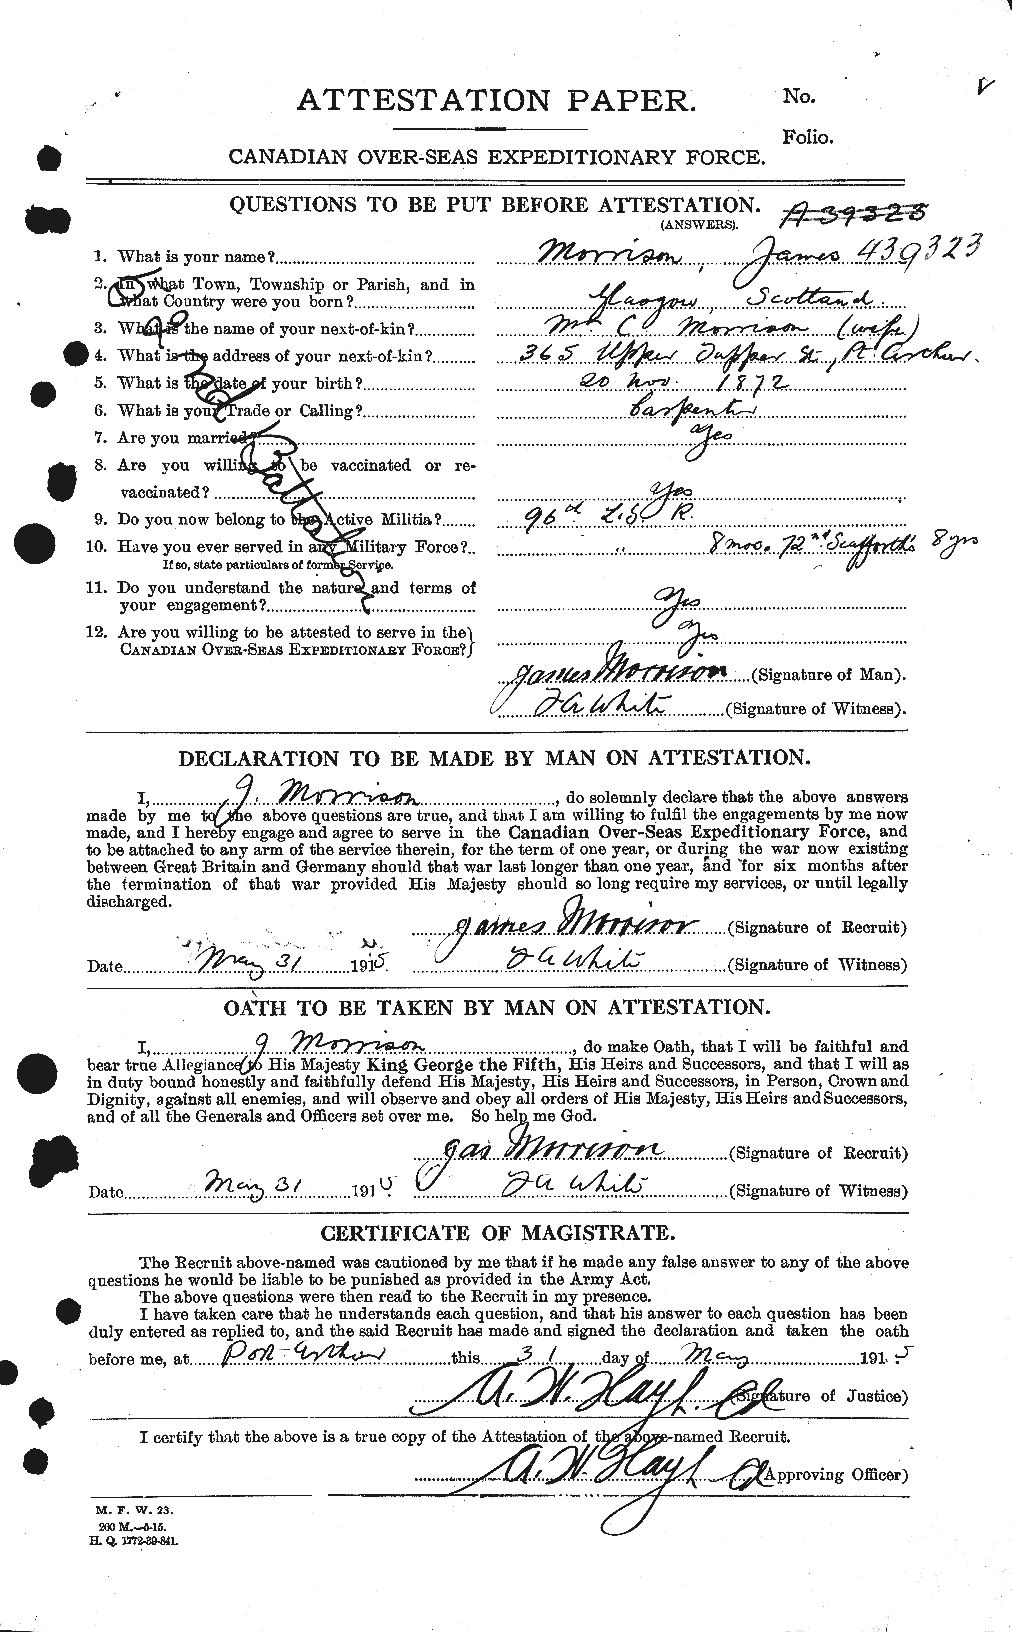 Personnel Records of the First World War - CEF 506905a